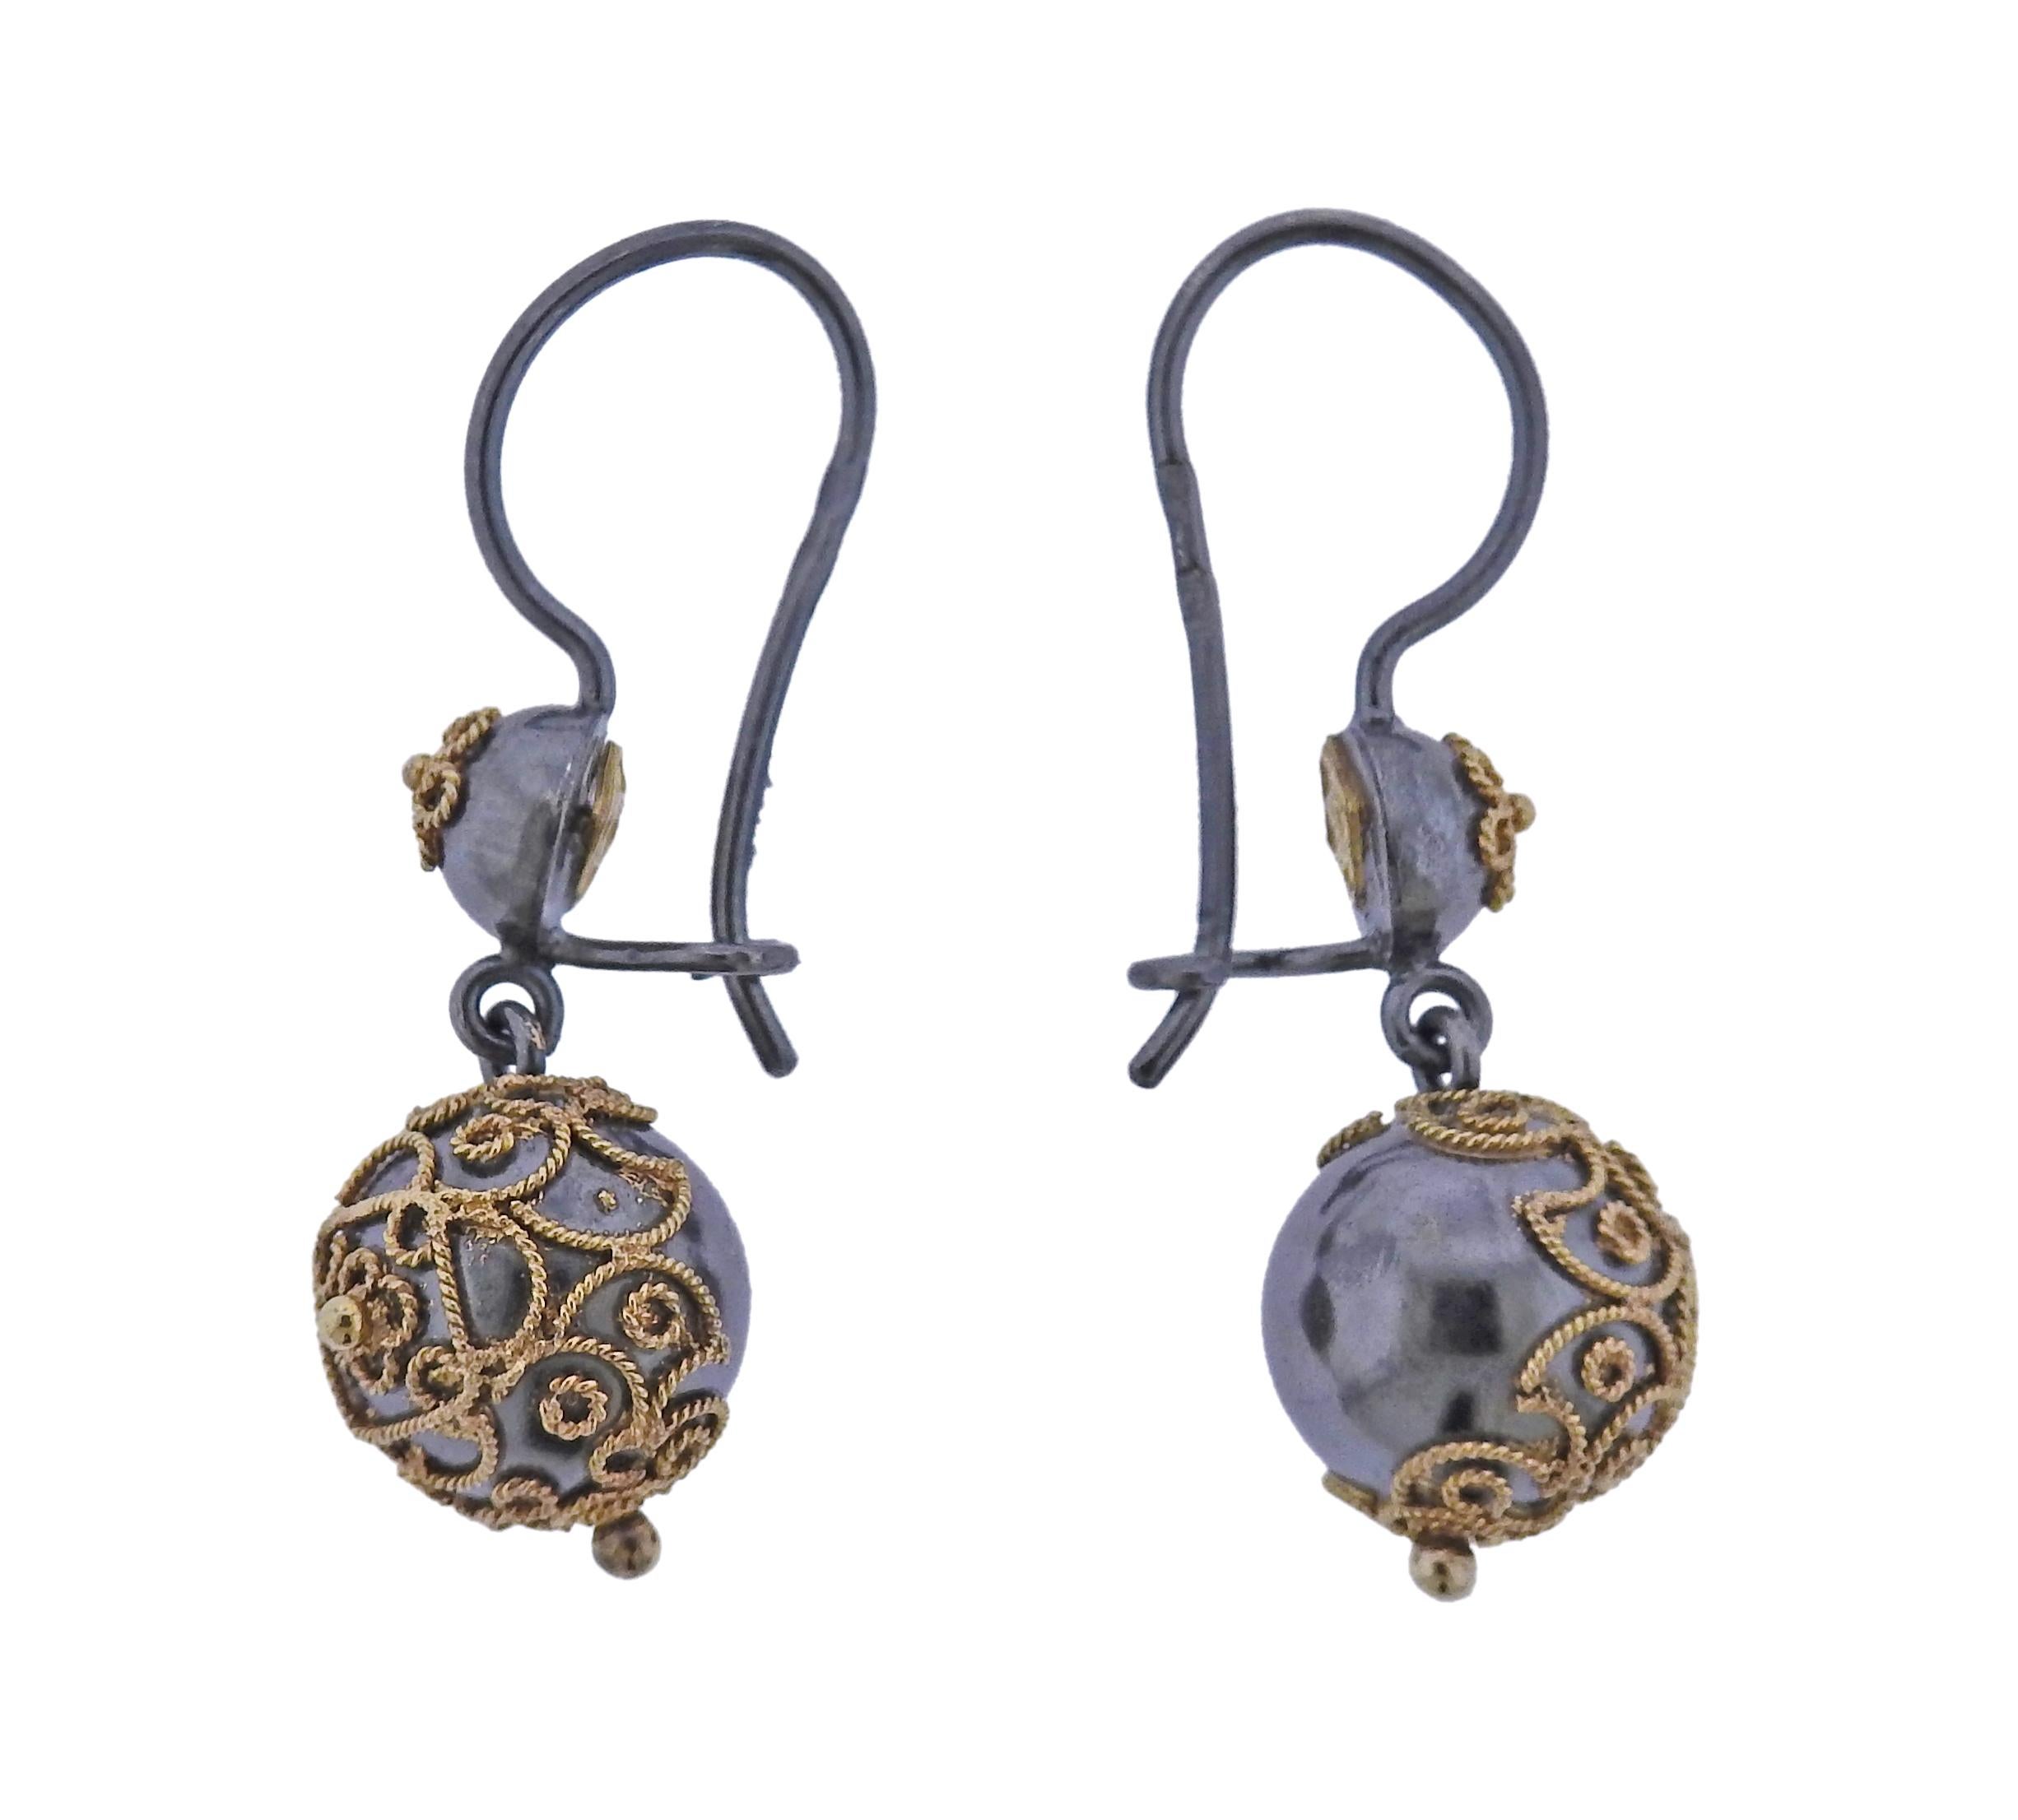 The jewelry offered by Castellani today, is created by the same gold techniques as in the 1850’s as well as by the ancient Etruscans. Pair of 18k gold and silver filigree ball drop earrings by Castellani. Earrings are 35mm long, ball is 10mm in